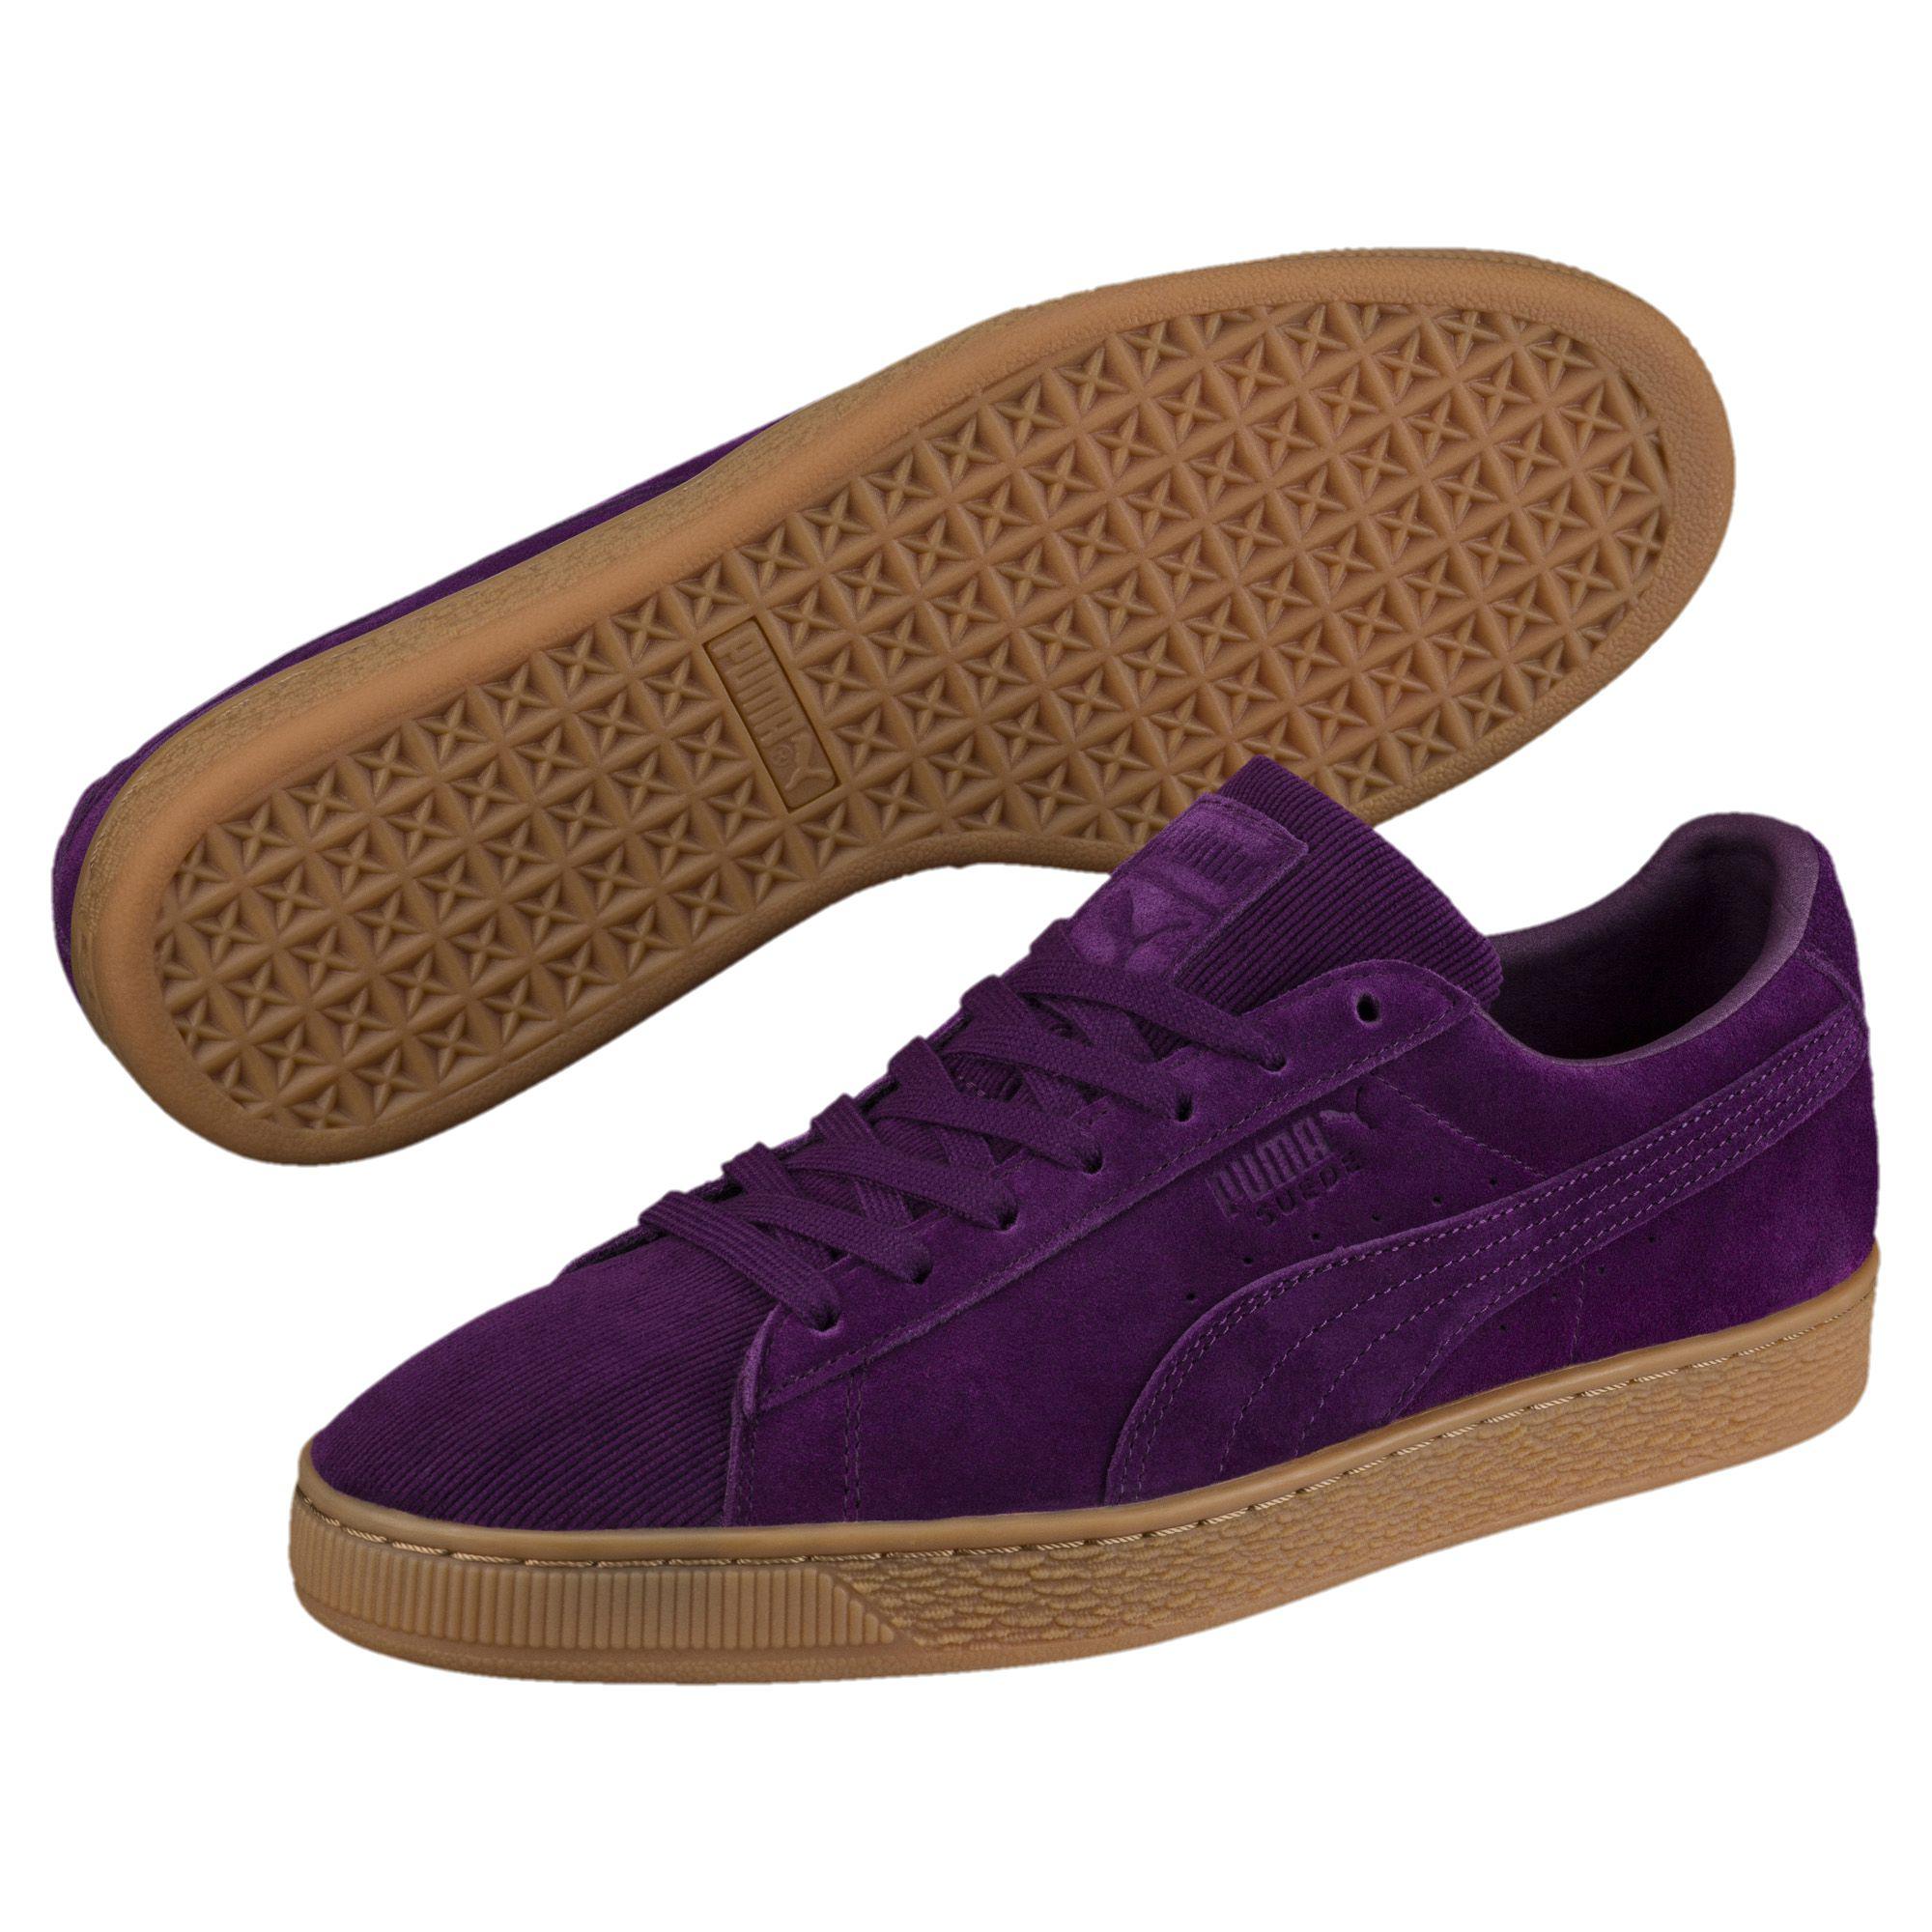 PUMA Suede Classic Pincord Sneakers in Purple for Men - Lyst